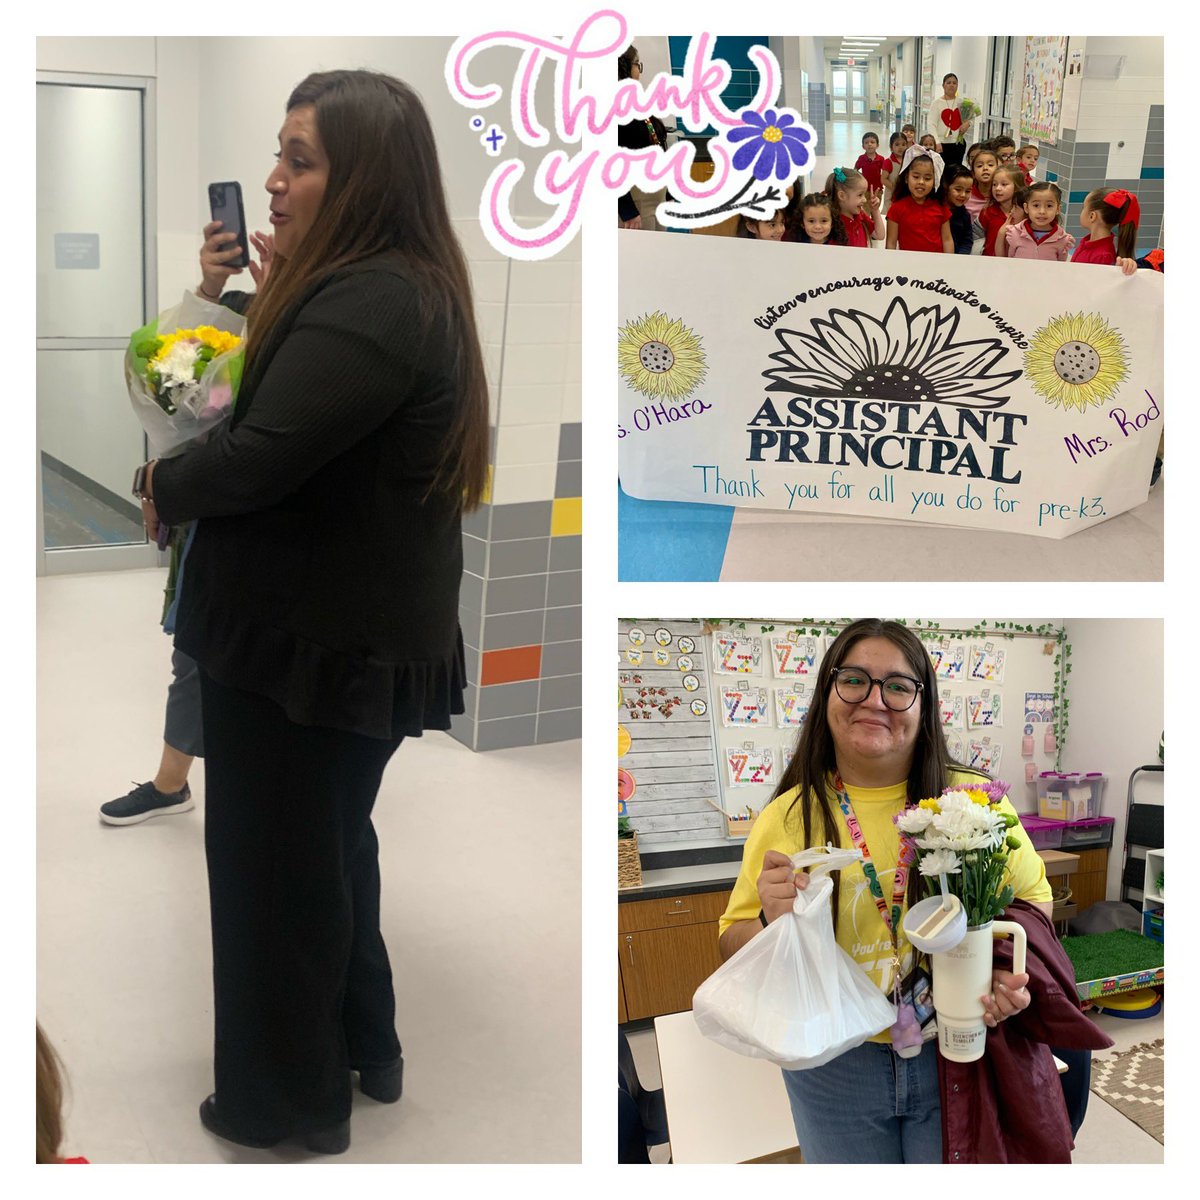 A week full of celebration, thank you ladies for everything you do! #blessed #assistantprincipalsweek #librarian #paraprofessionalappreciationday